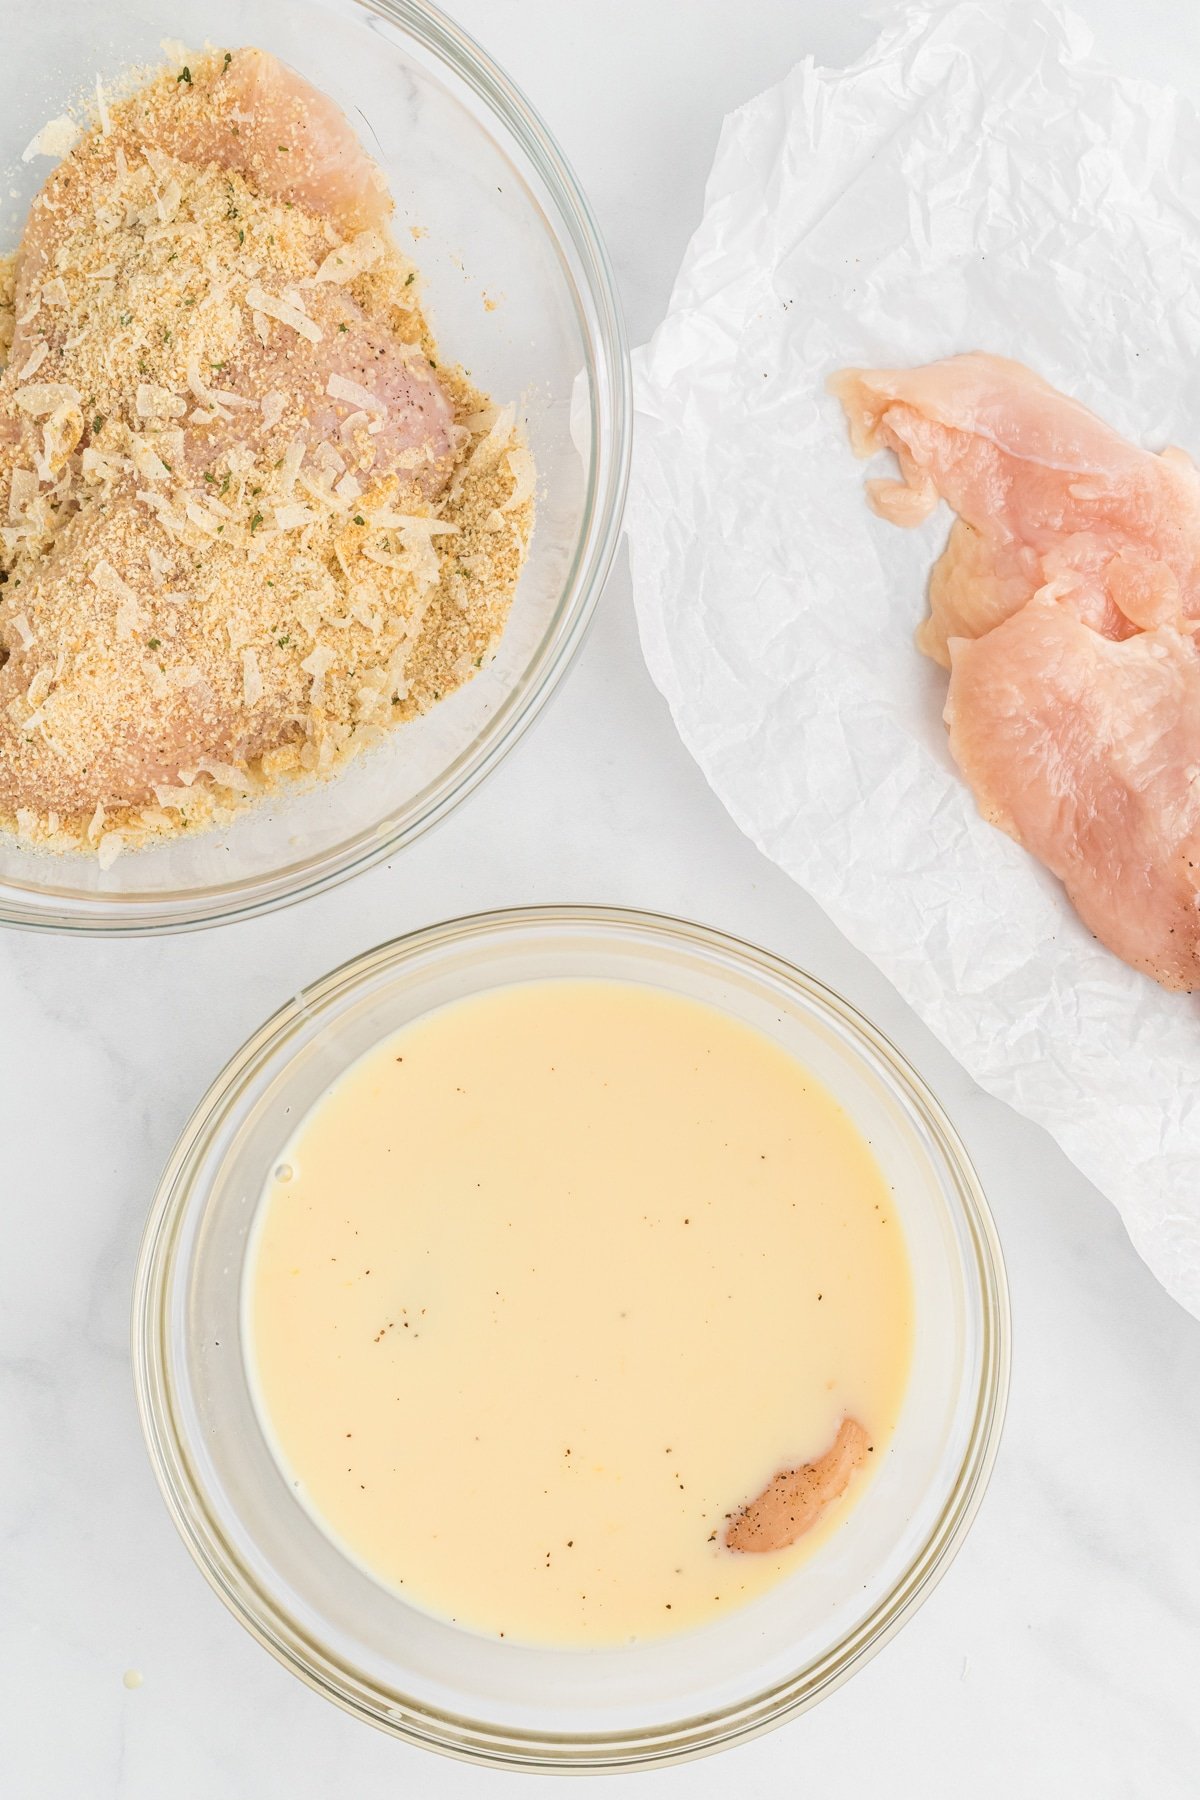 Chicken breasts dipped in an egg wash and bread crumbs